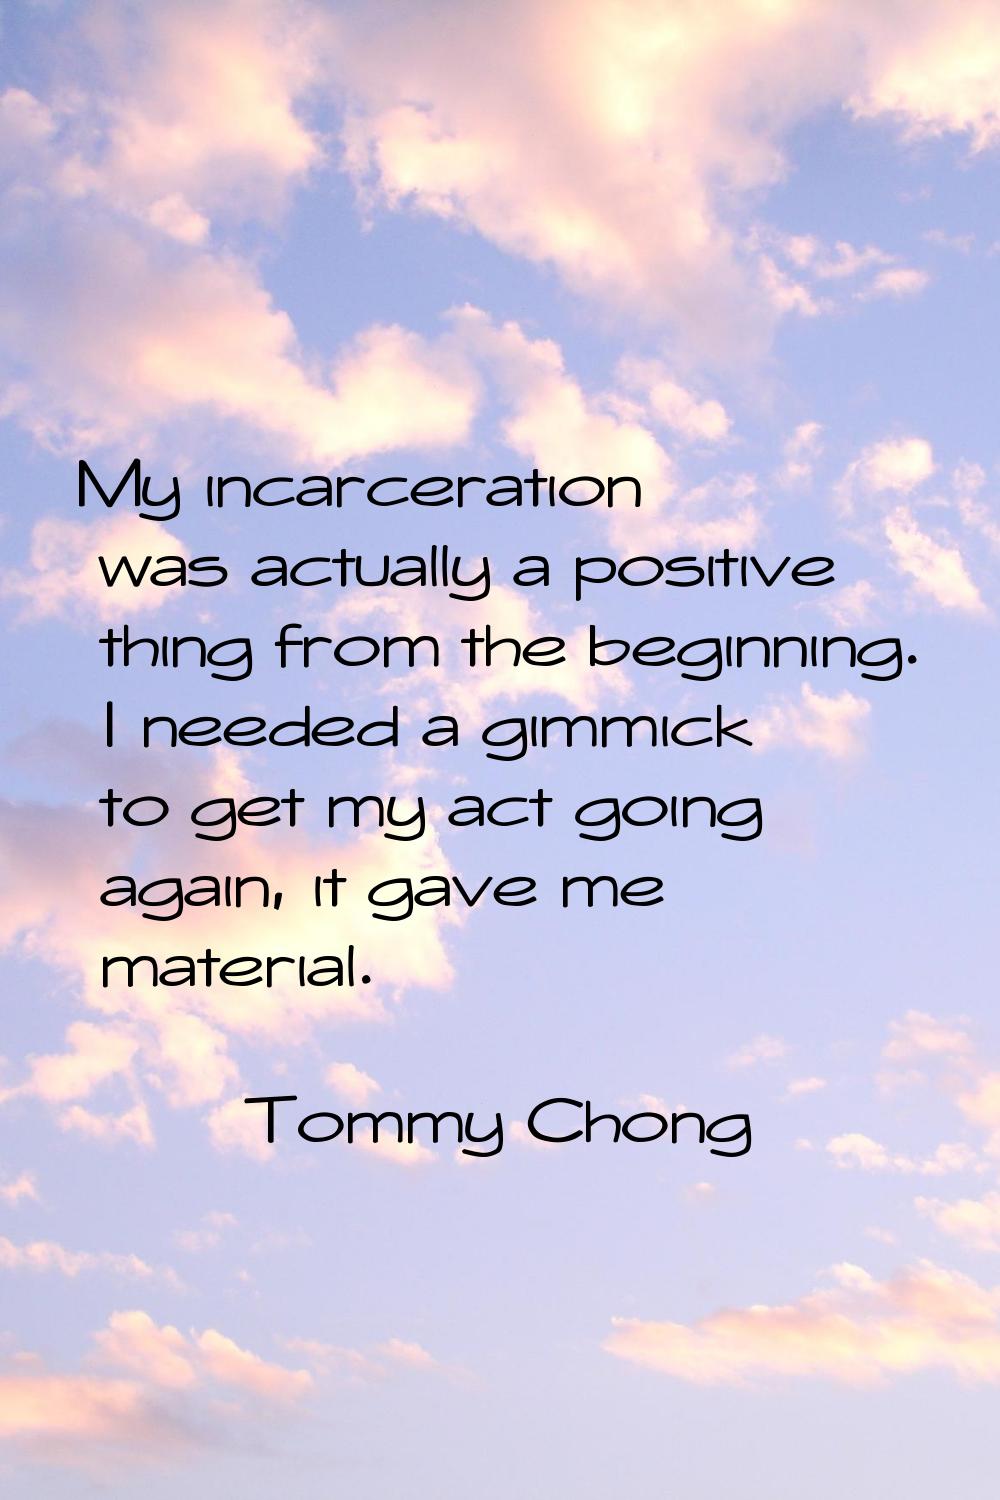 My incarceration was actually a positive thing from the beginning. I needed a gimmick to get my act